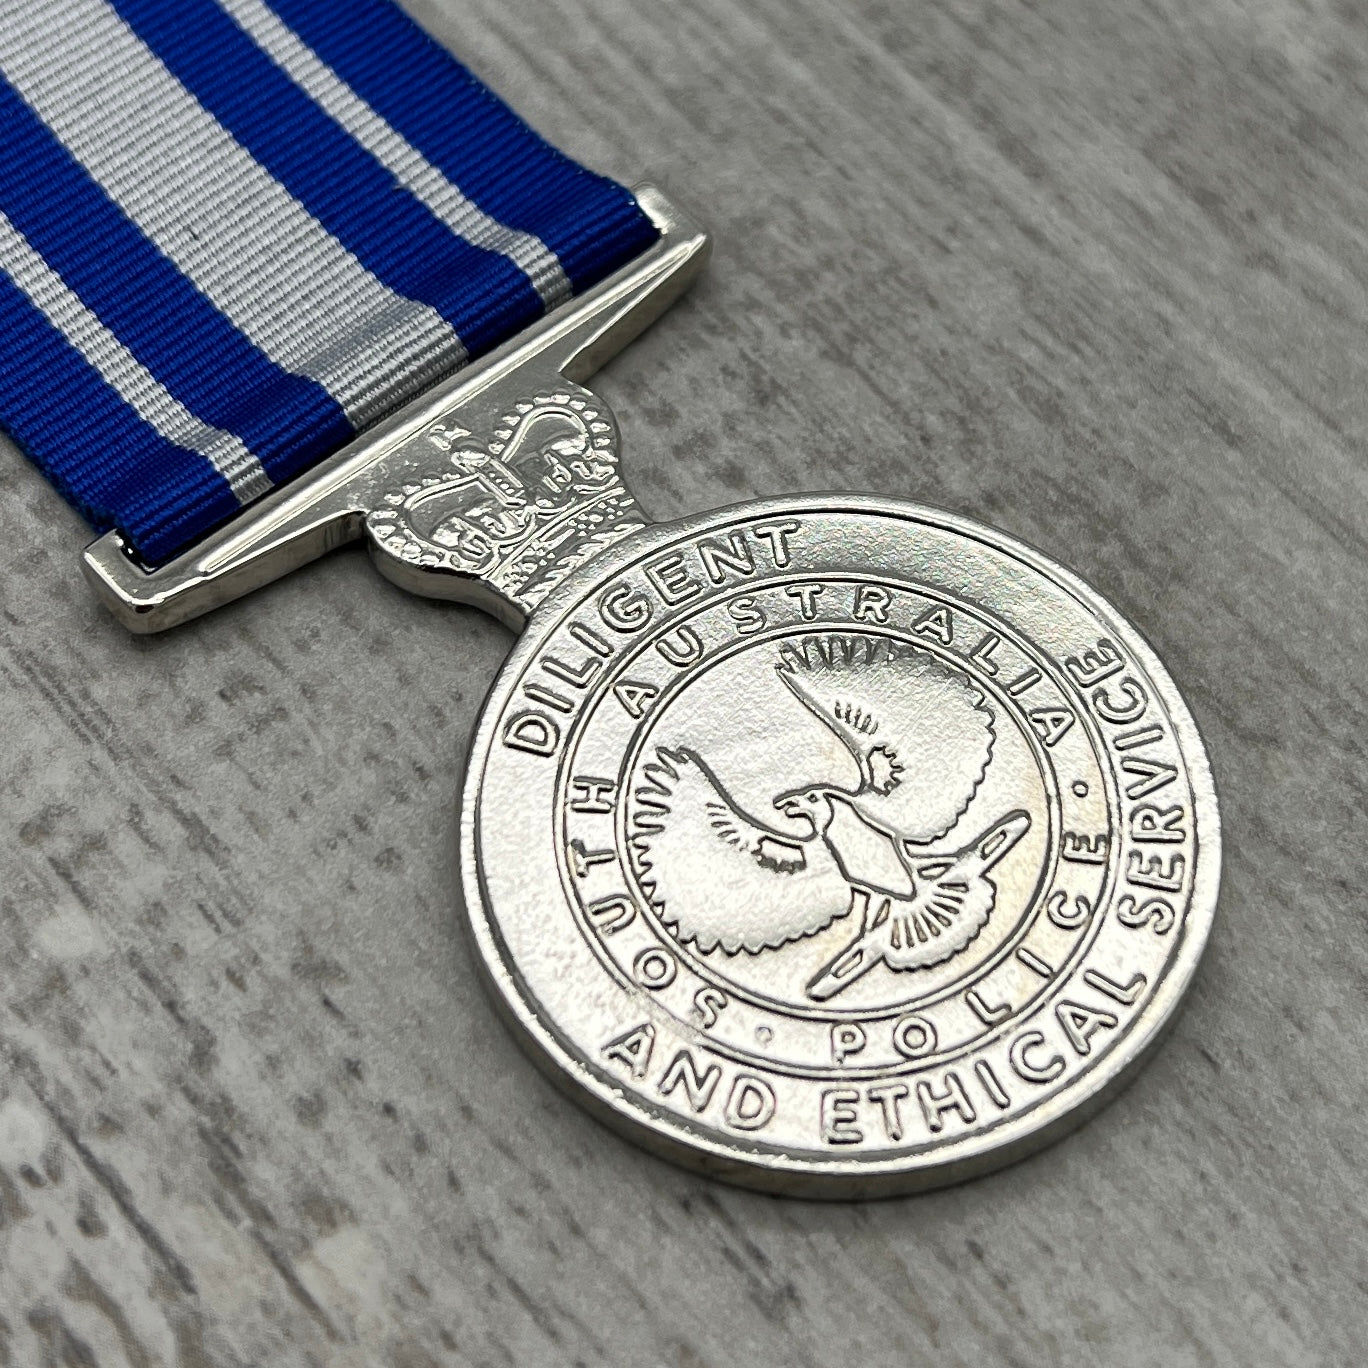 South Australia - Police Diligent & Ethical Service Medal - Foxhole Medals